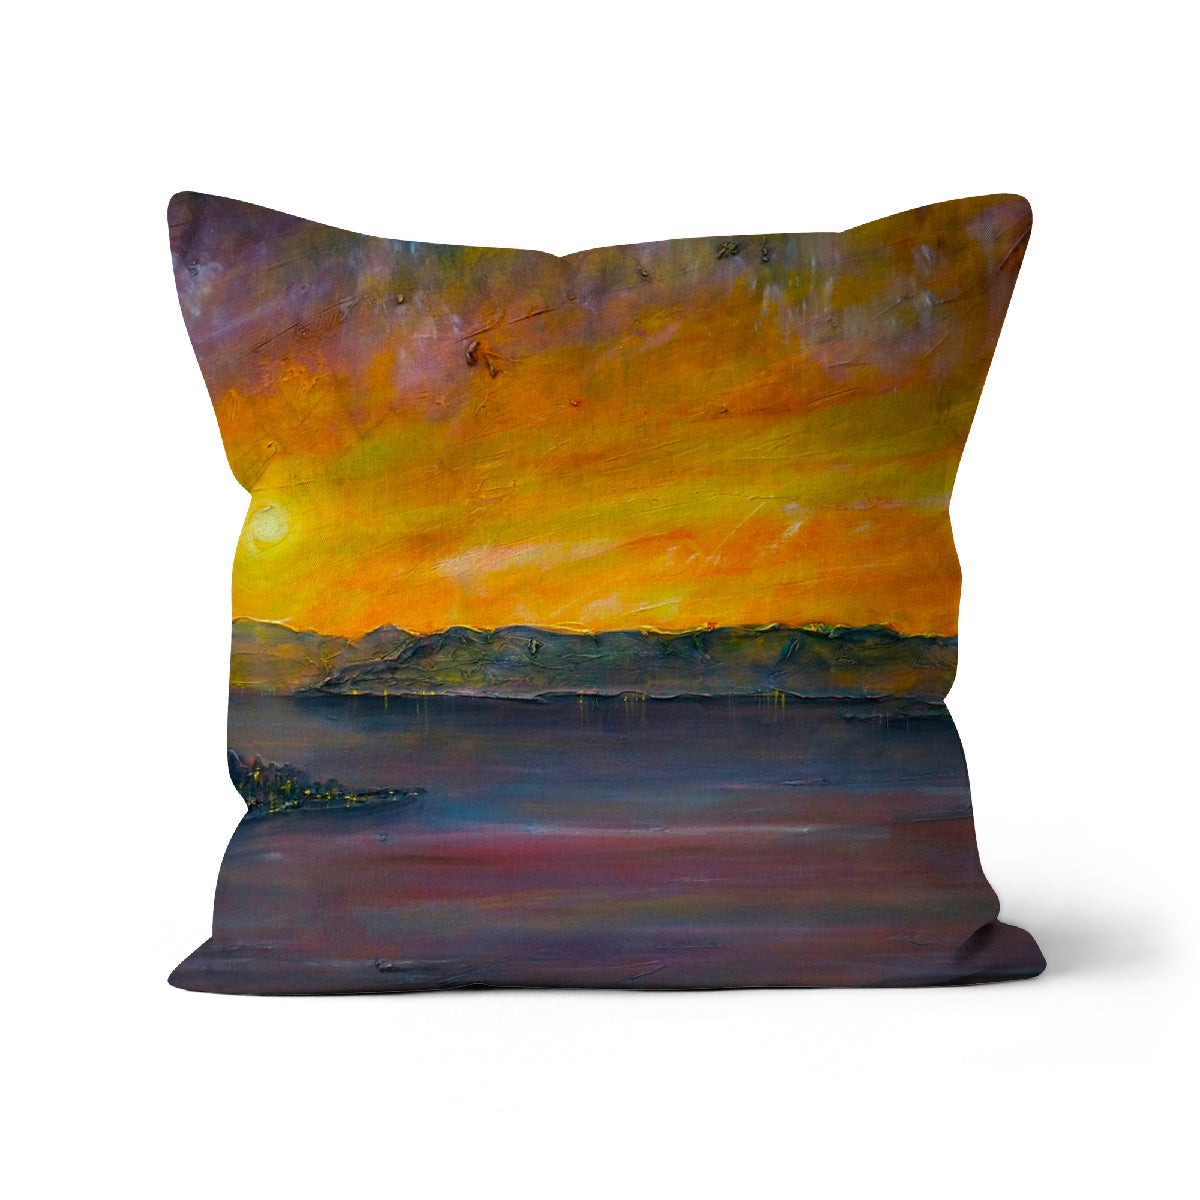 Sunset Over Gourock Art Gifts Cushion-Cushions-River Clyde Art Gallery-Linen-22"x22"-Paintings, Prints, Homeware, Art Gifts From Scotland By Scottish Artist Kevin Hunter